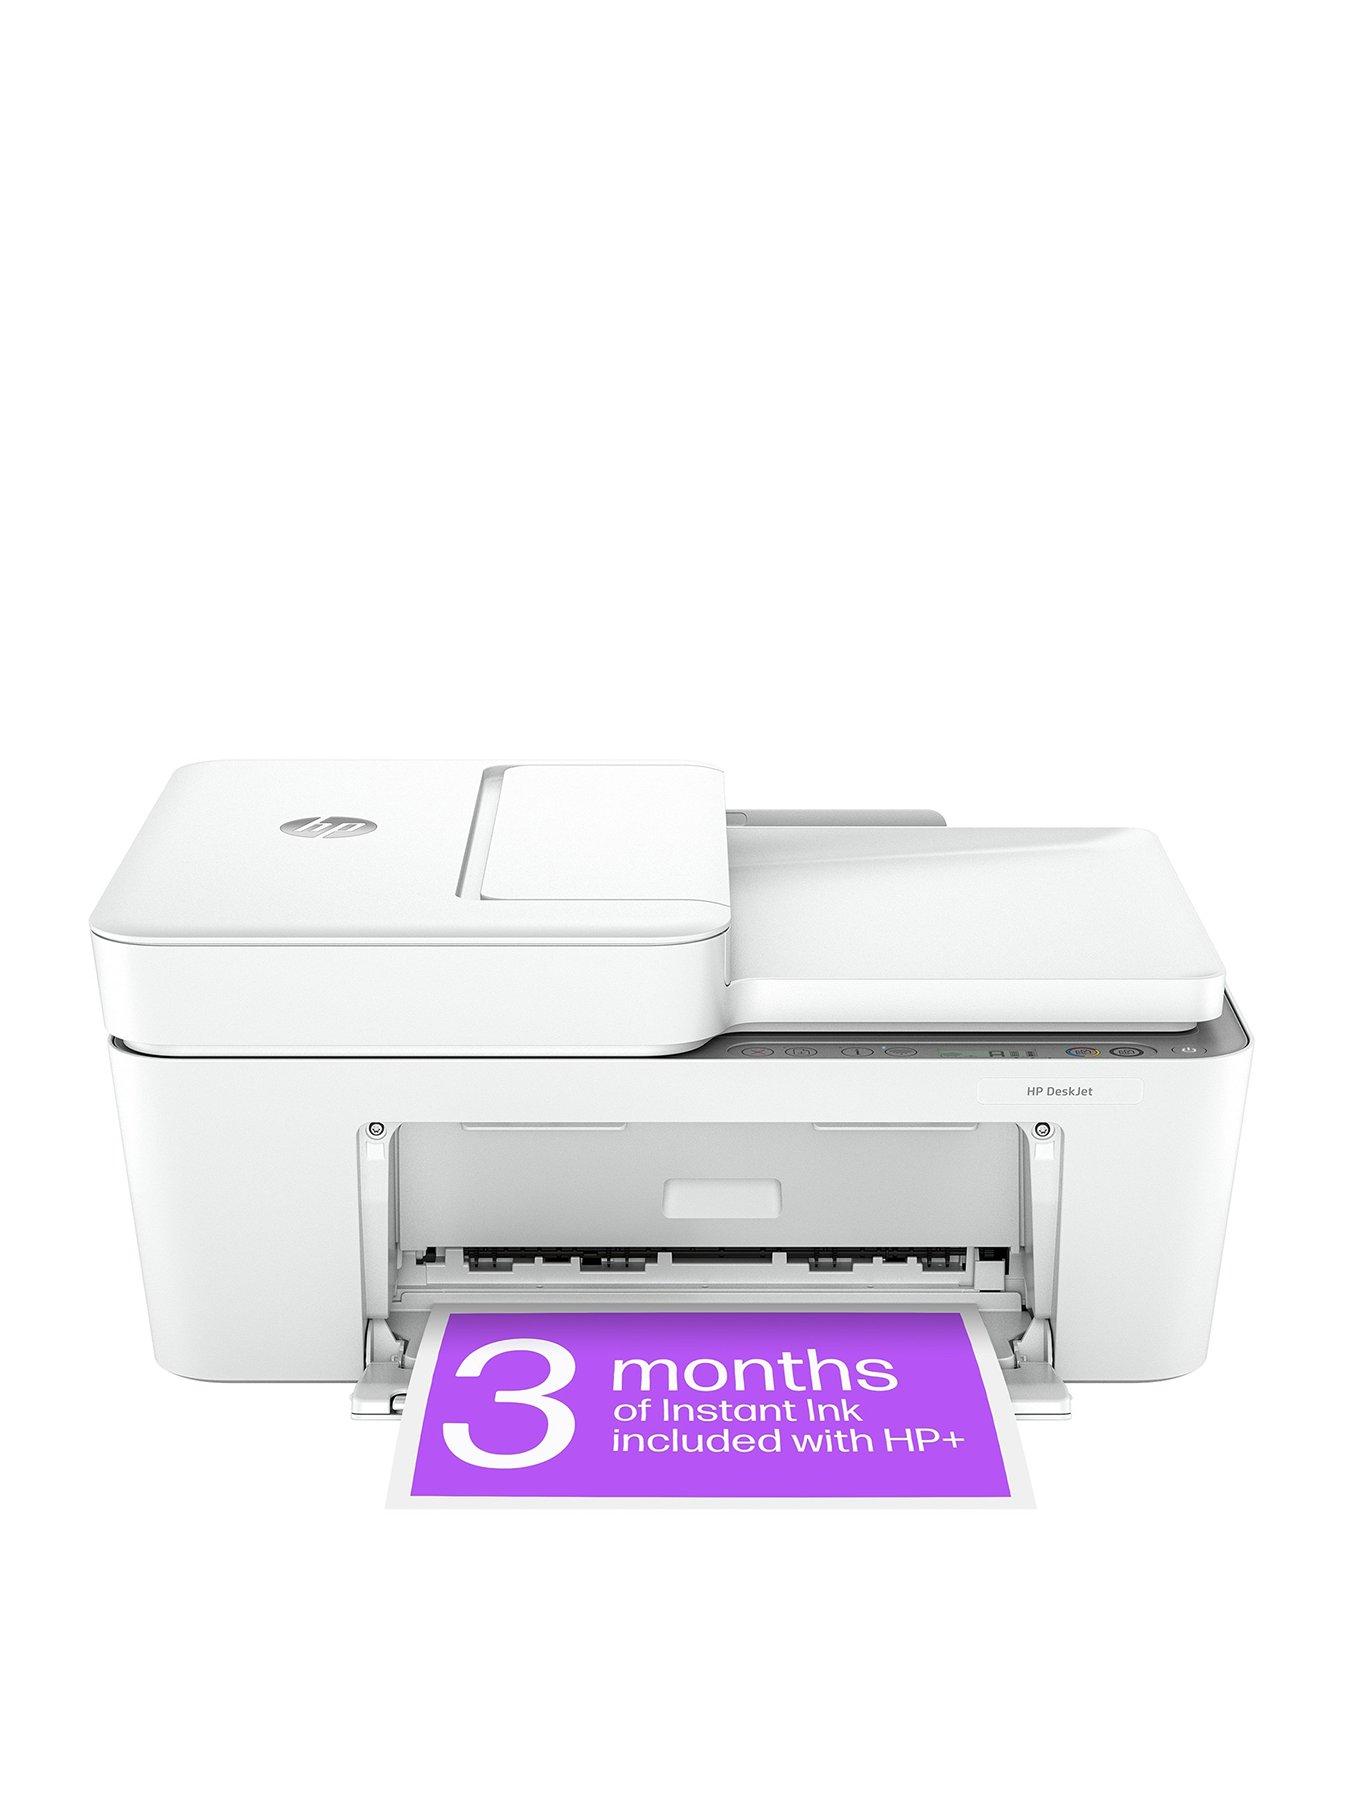 HP Deskjet 3760 All-in-One Wireless Printer, HP Instant Ink Compatible with  4 Month Trial